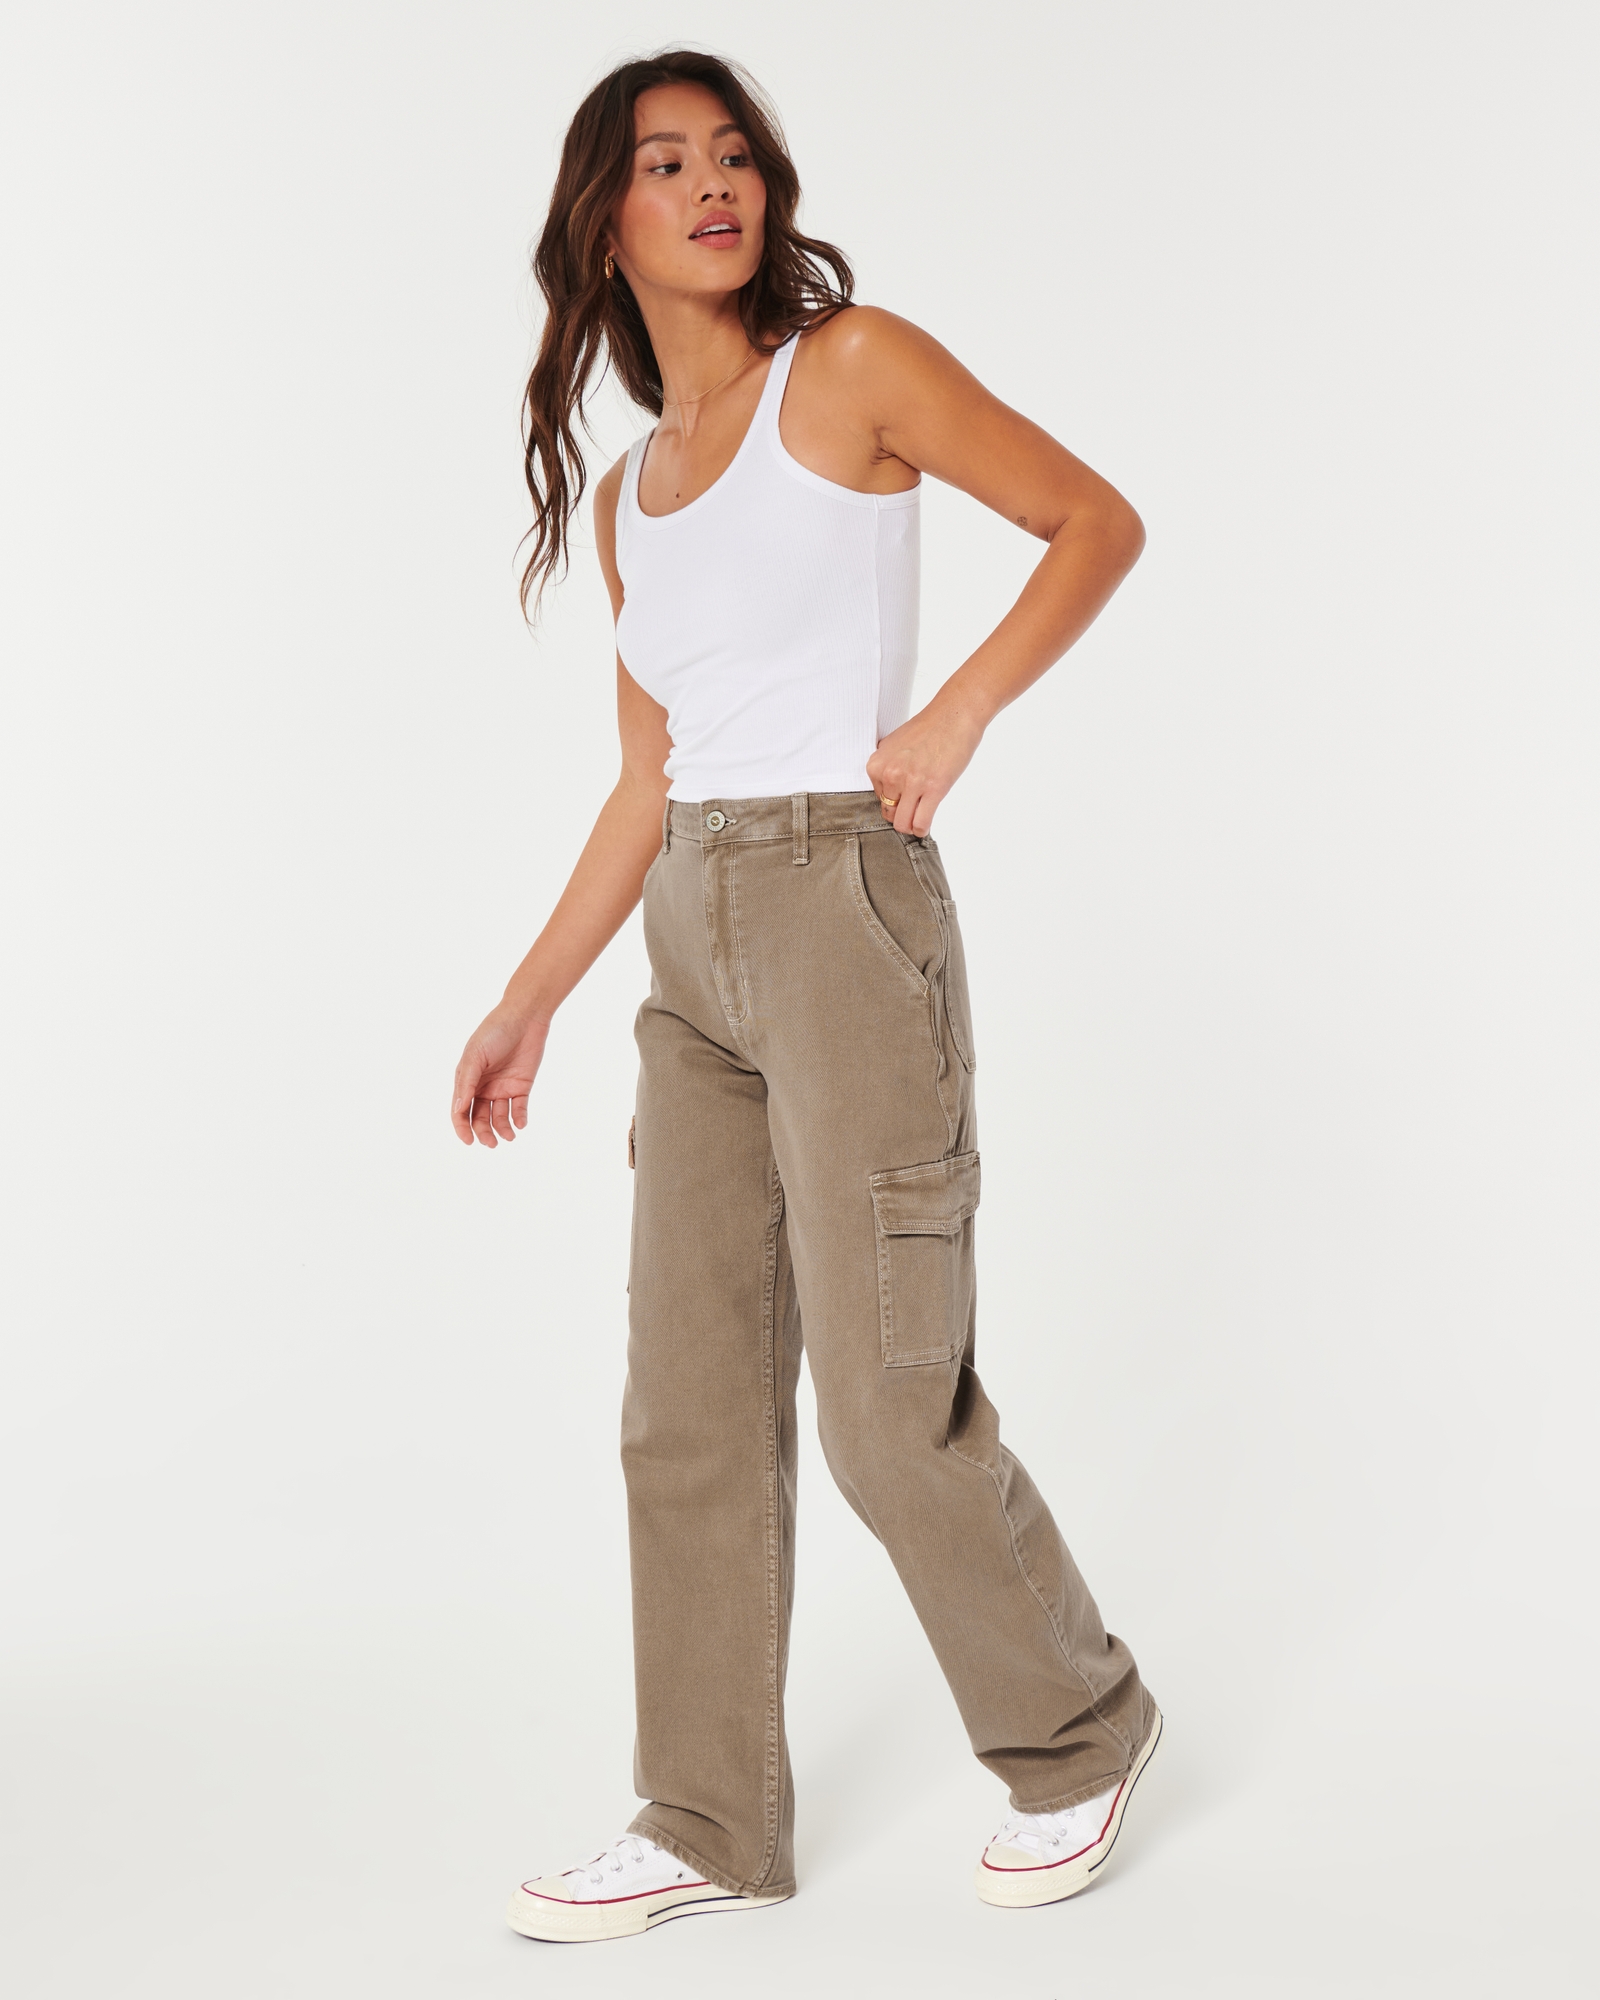 Women's Ultra High-Rise Black Dad Jeans - Hollister Co.